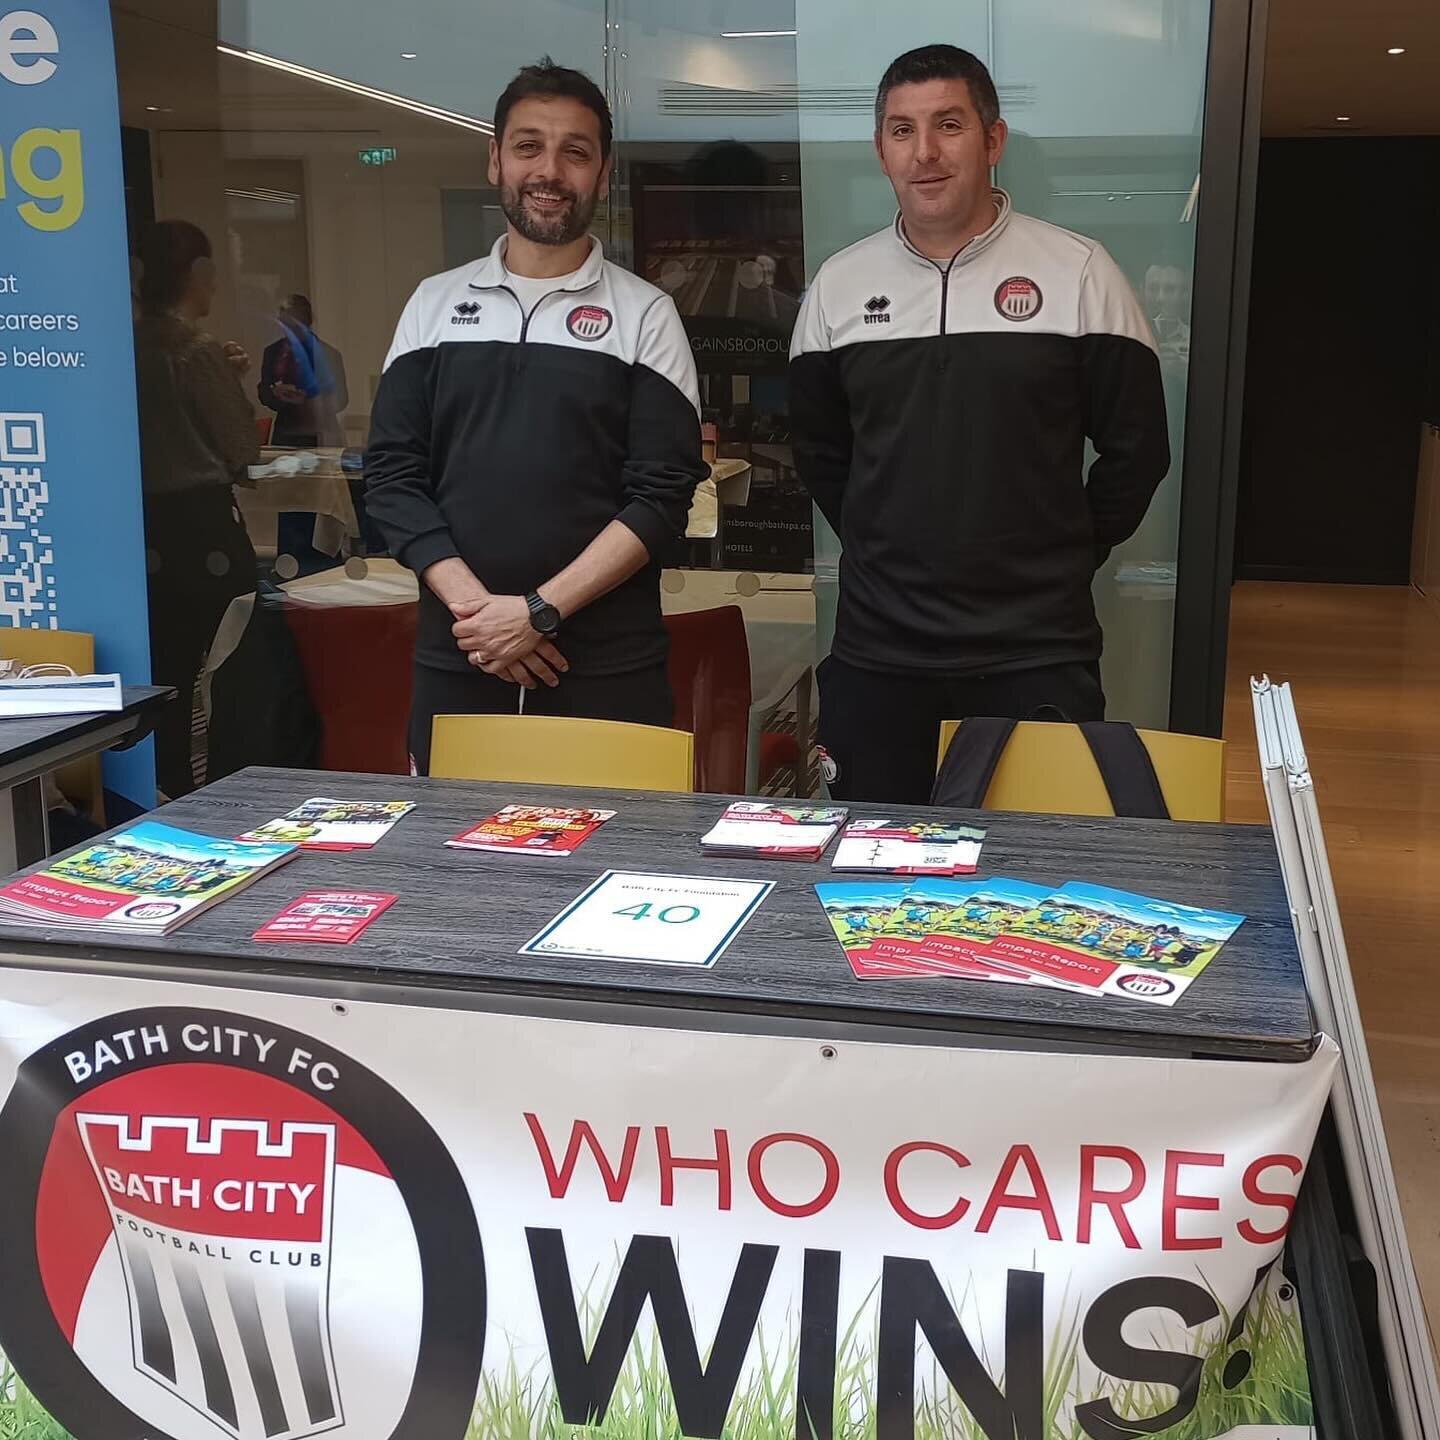 We&rsquo;re at the Bath College Apprenticeships &amp; Careers Fair until 2pm! 🤝🏻

Come and chat to us! 🗣️

#WhoCaresWins | #bathcollegefair24